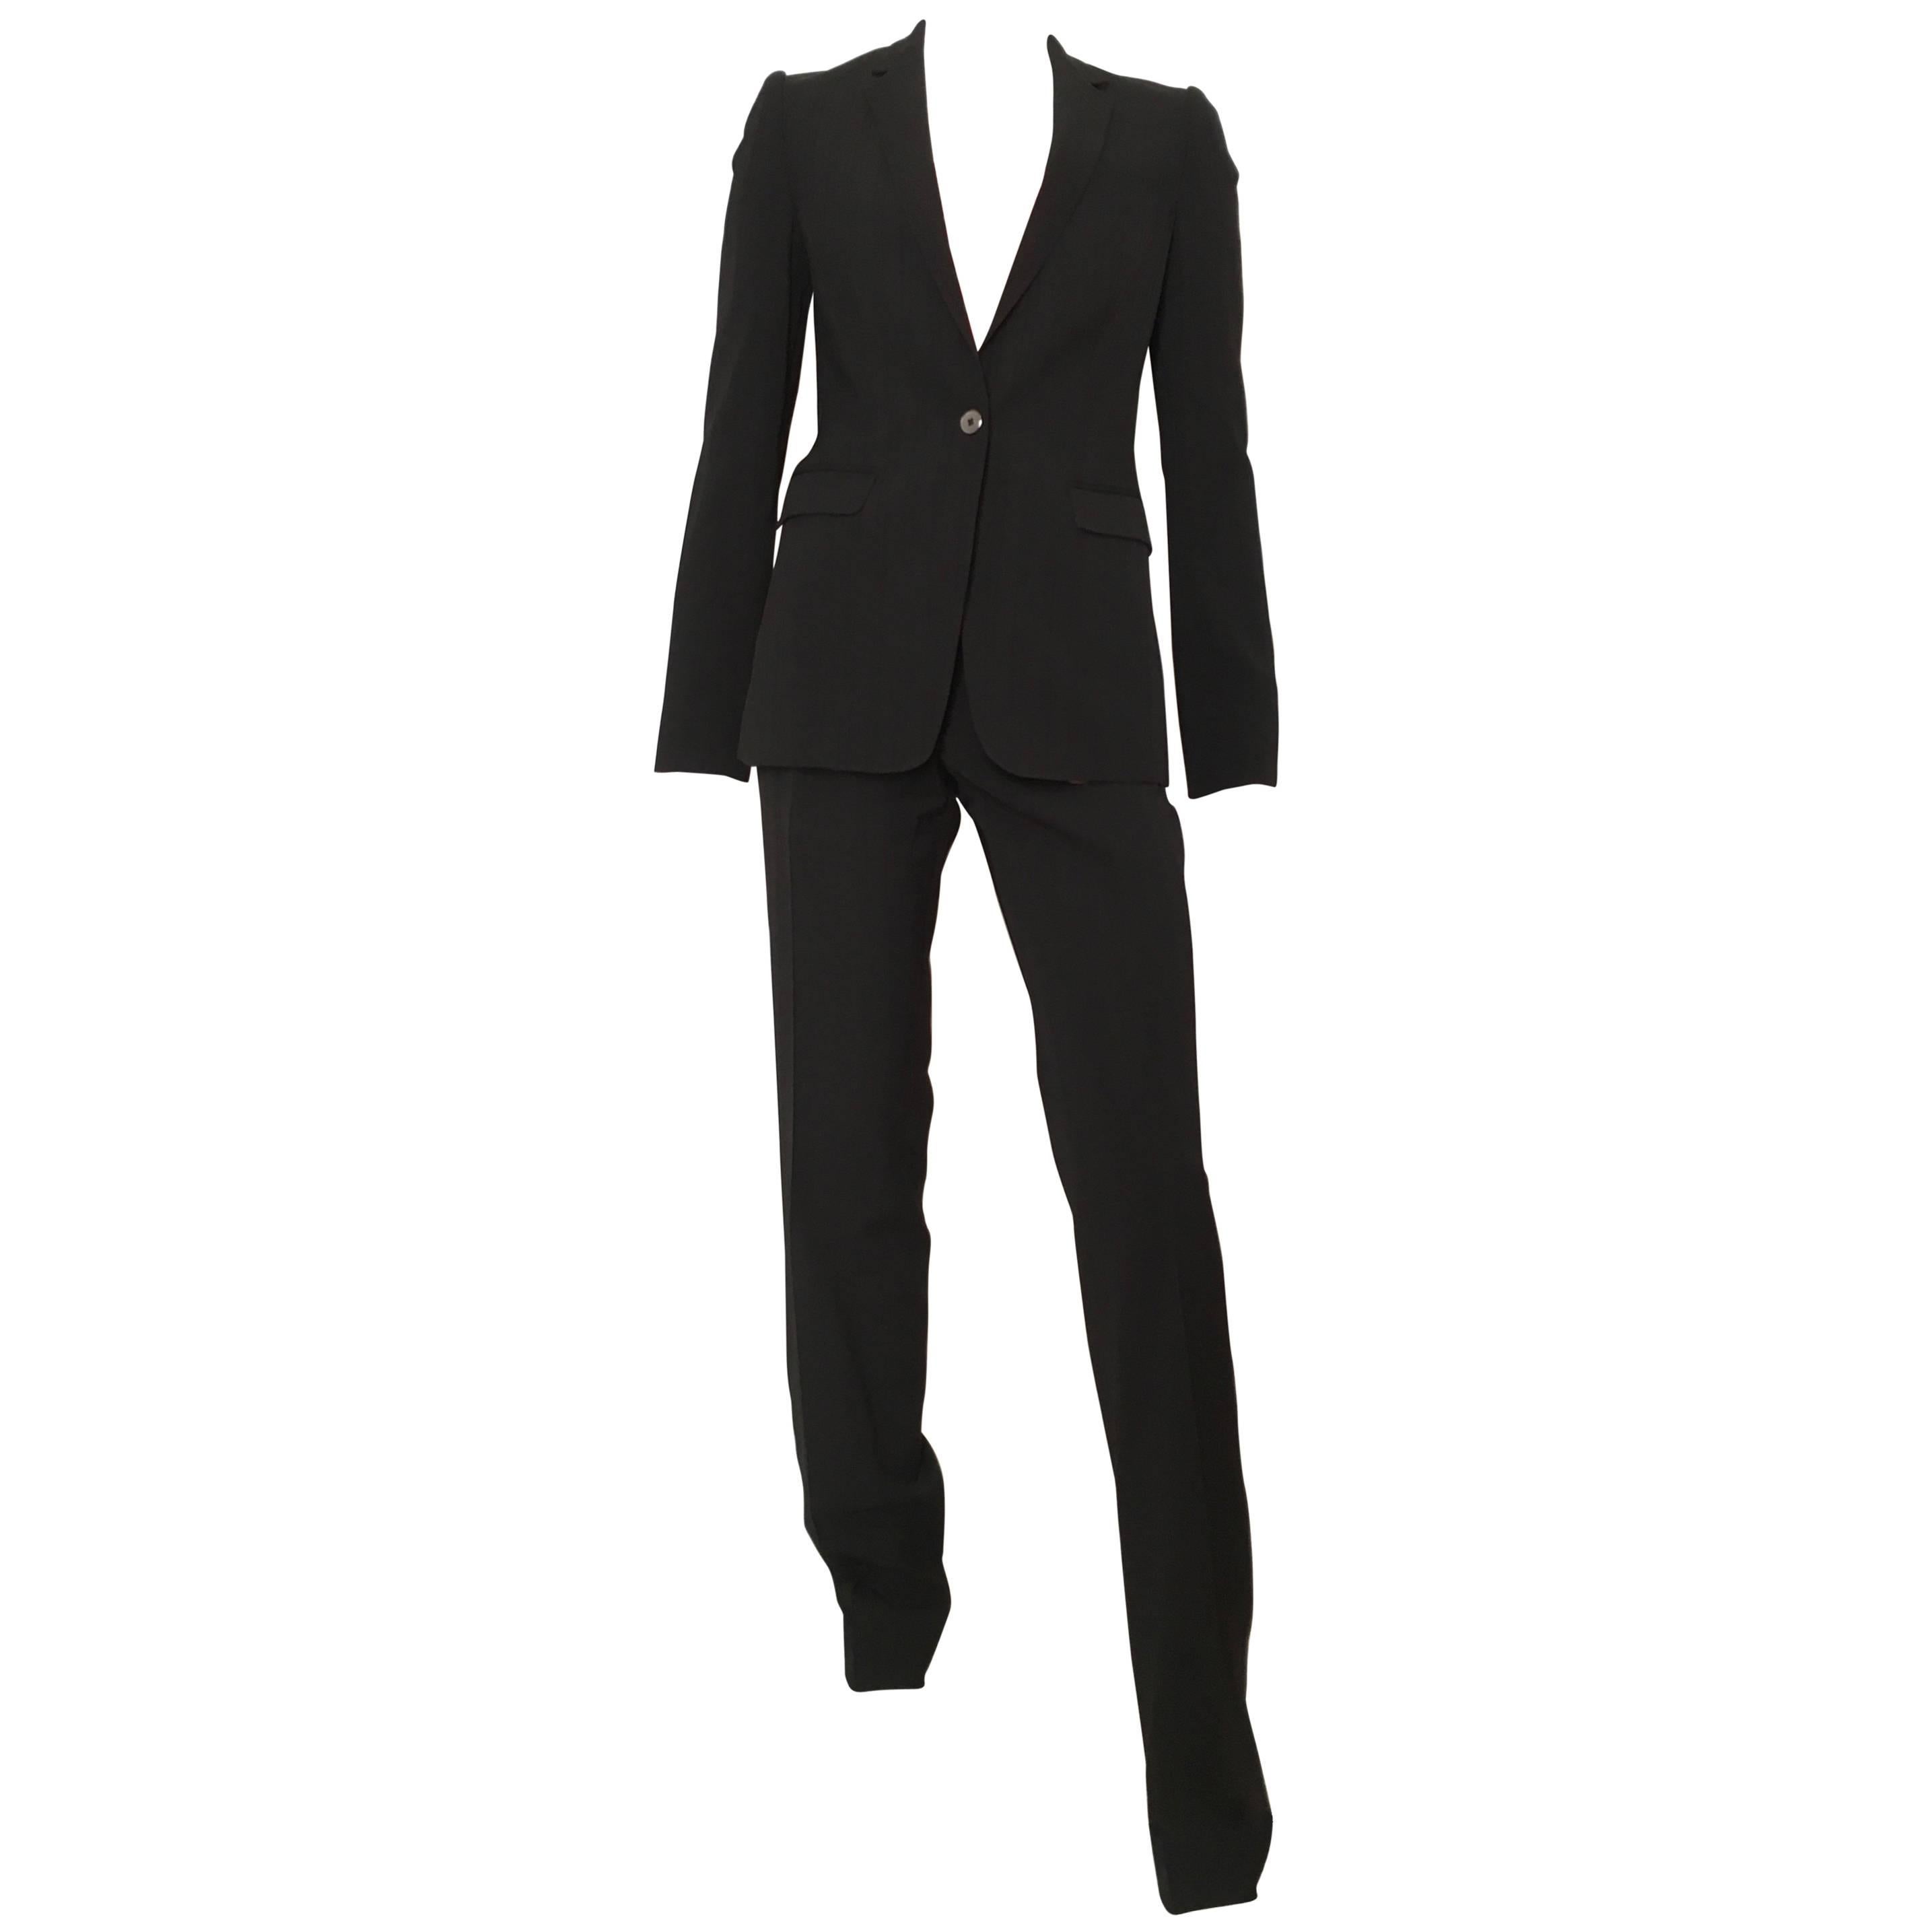 Dolce & Gabbana Black Striped Wool Pant Suit with Cheetah lining Size 4. For Sale